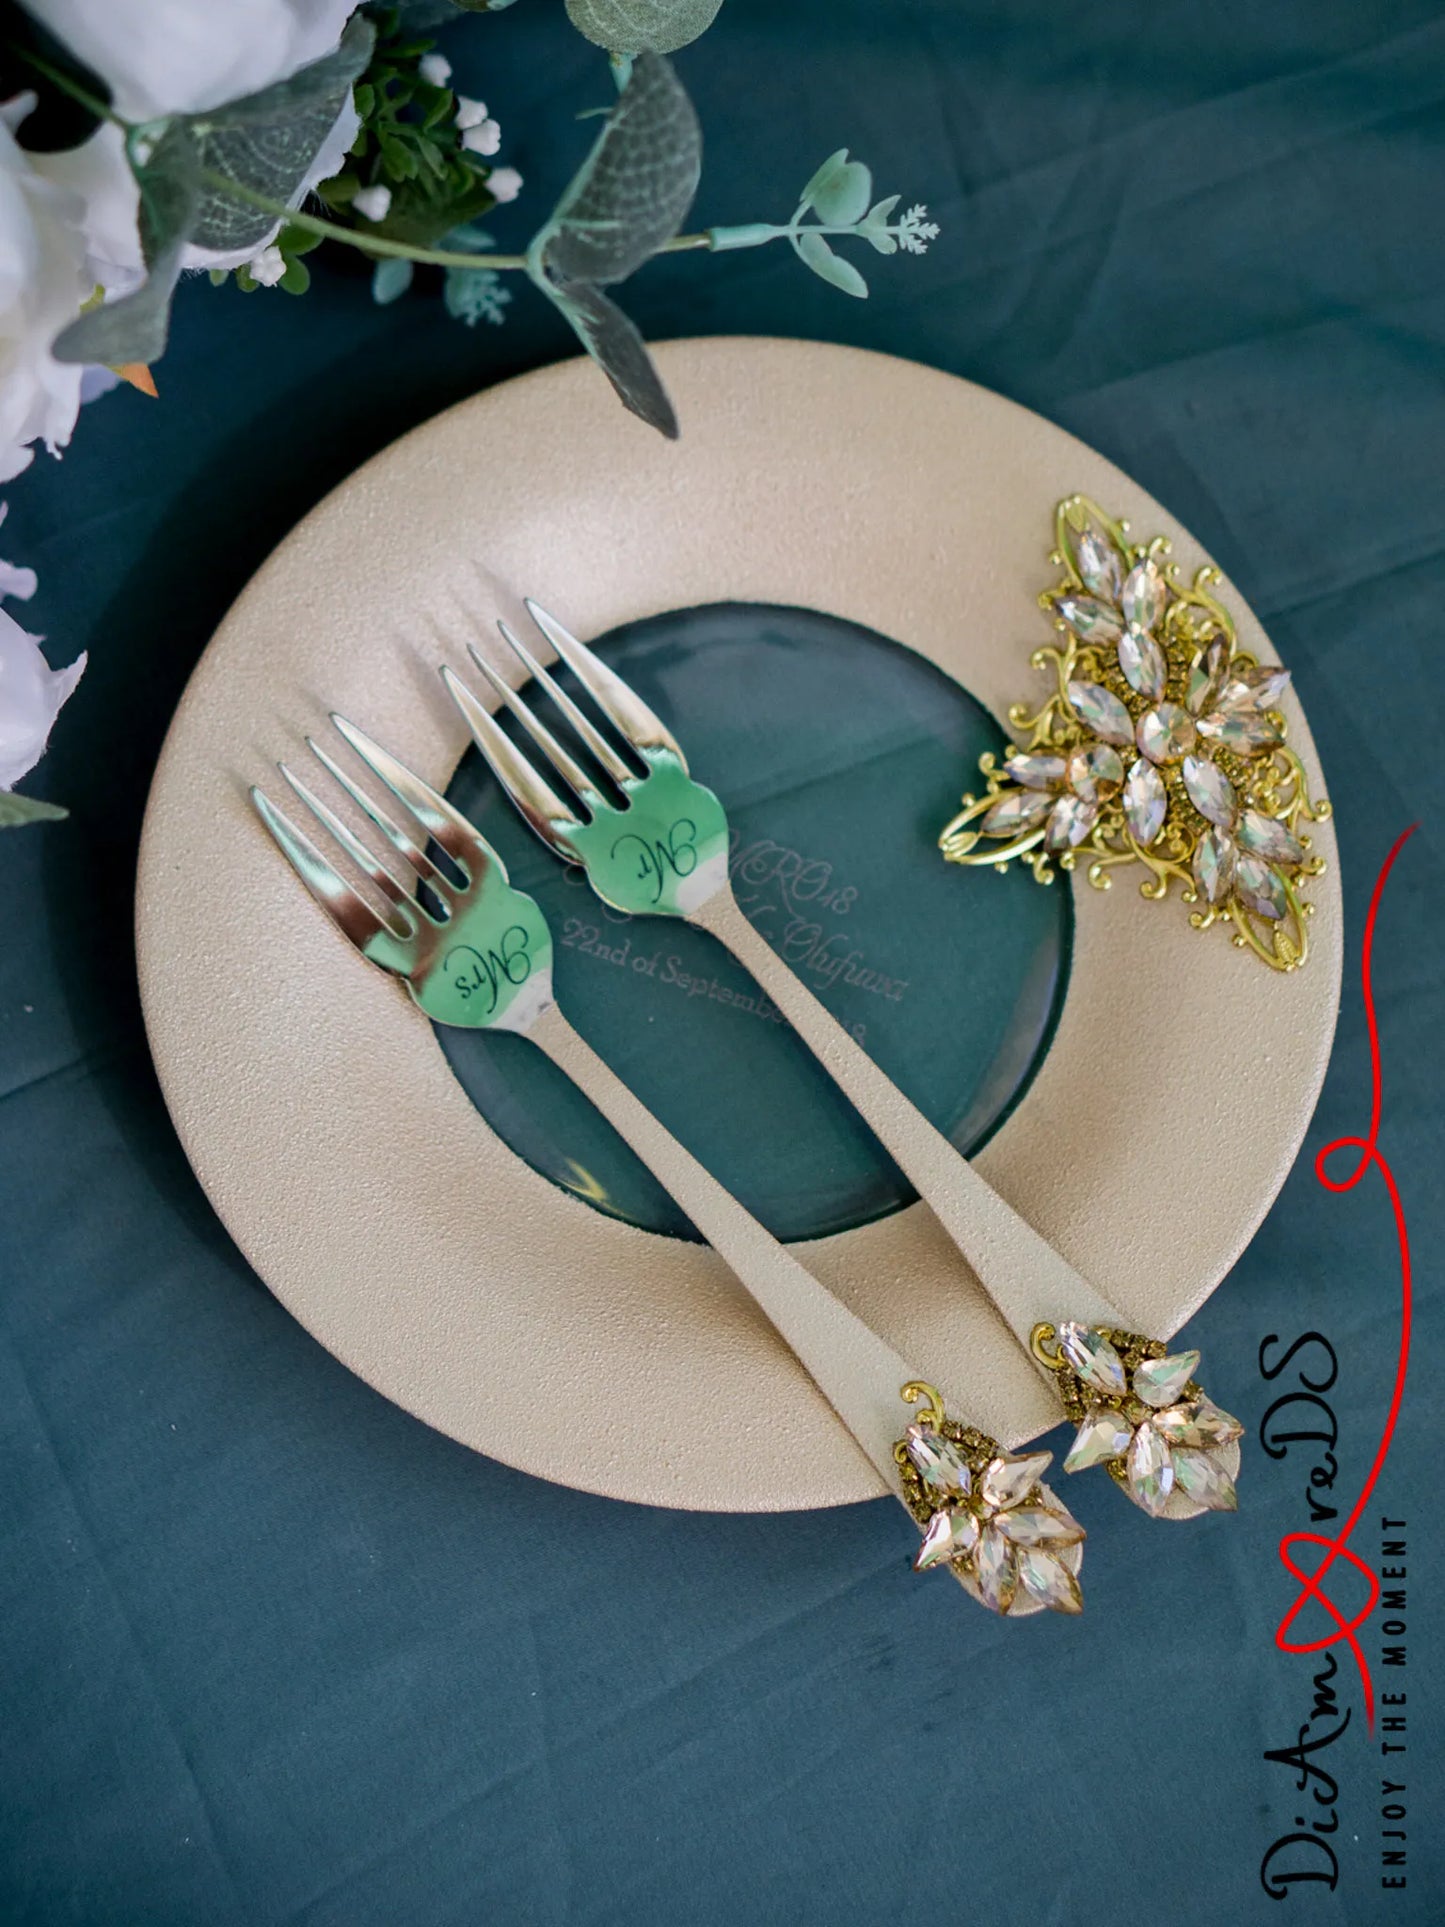 Gloria Gold Mr. and Mrs. Dessert Forks and Plate Set - Personalized Elegance